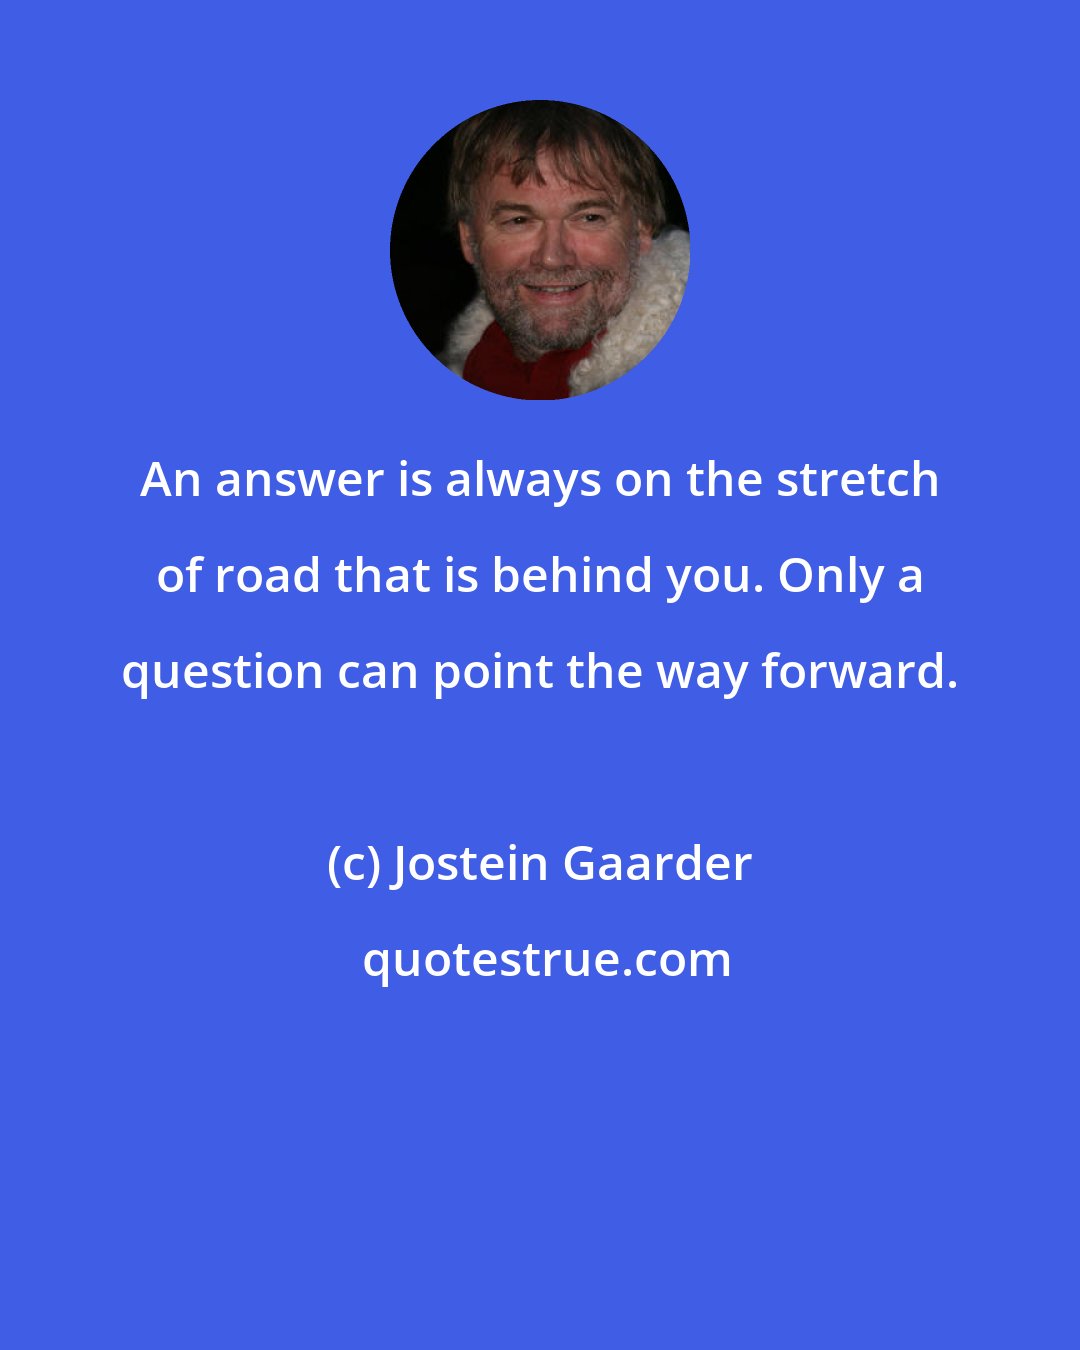 Jostein Gaarder: An answer is always on the stretch of road that is behind you. Only a question can point the way forward.